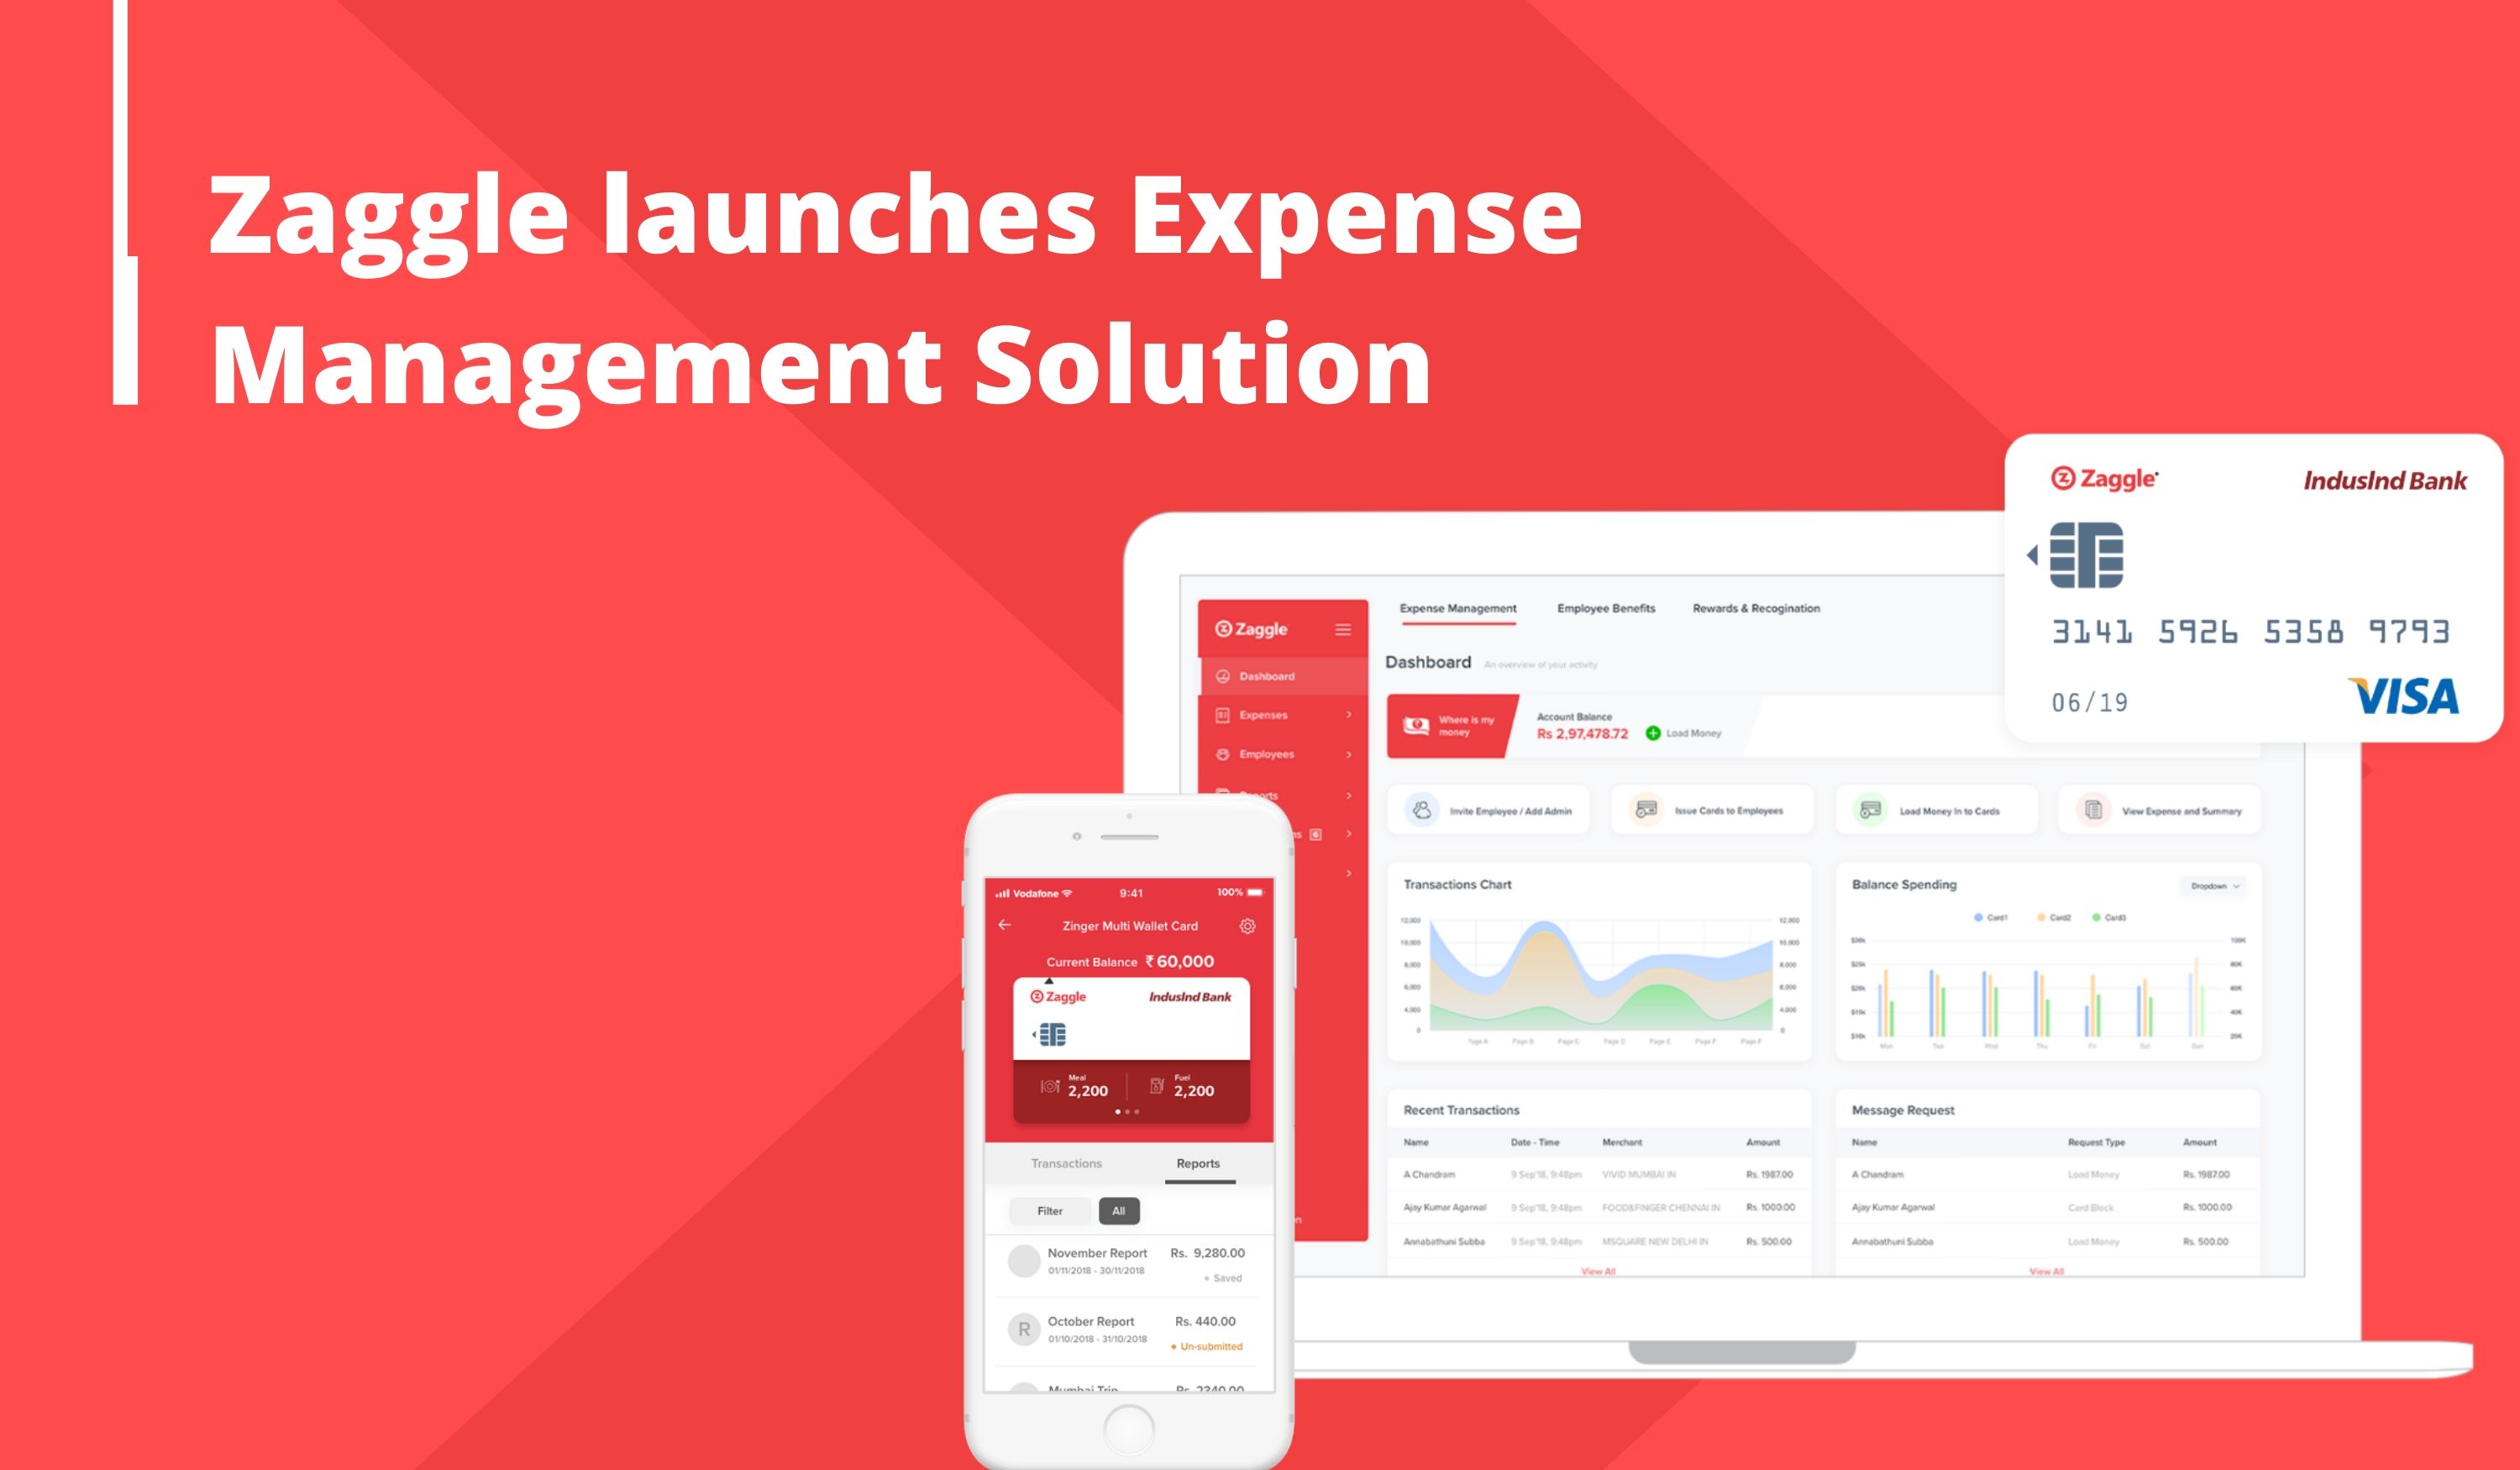 Zaggle launches Expense Management Solution